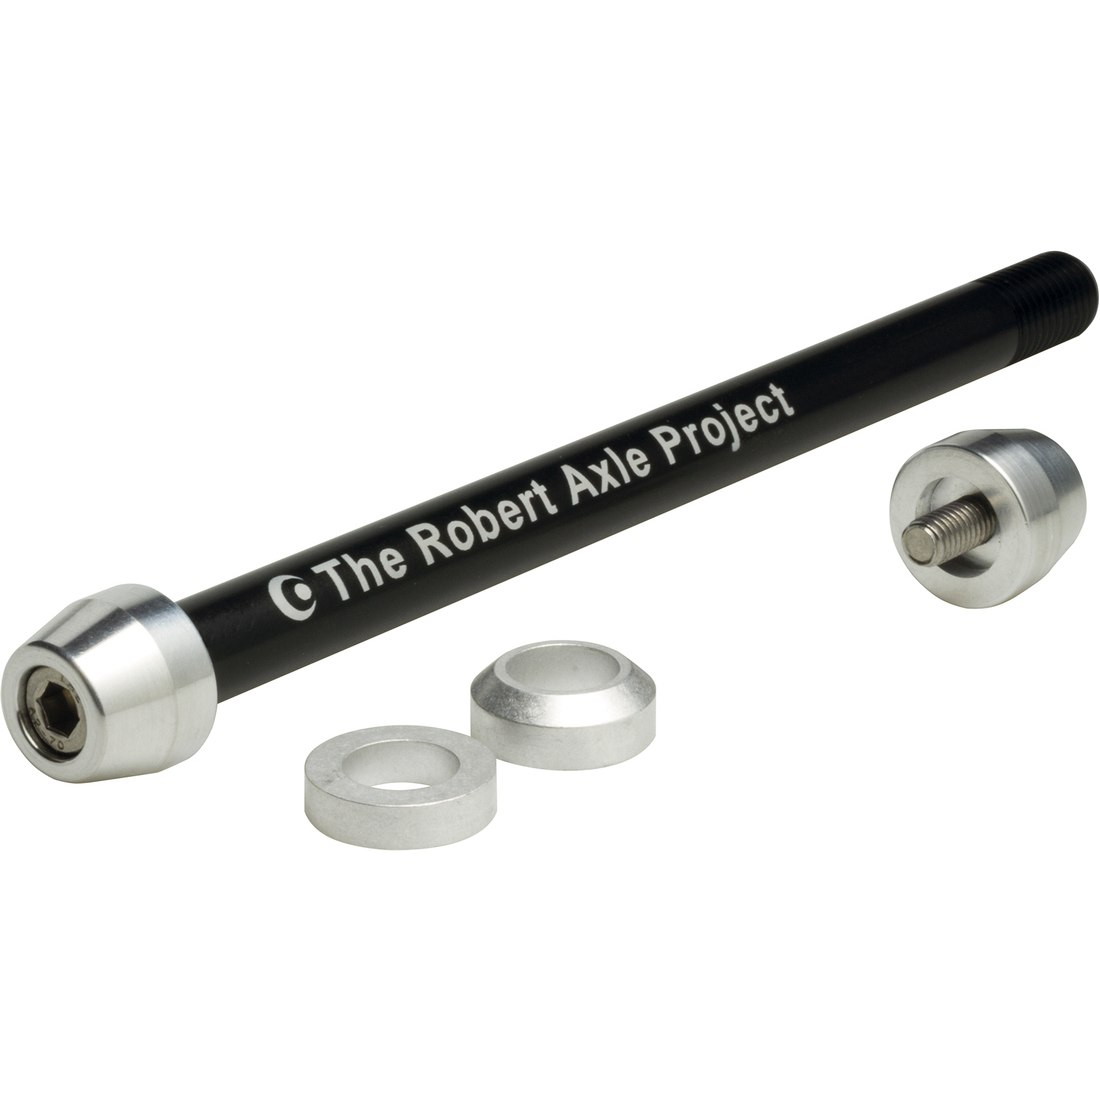 Productfoto van The Robert Axle Project - Thru Axle for Bike Trainers - 12x142mm - M12x1.0 152-172mm - TRA213/217